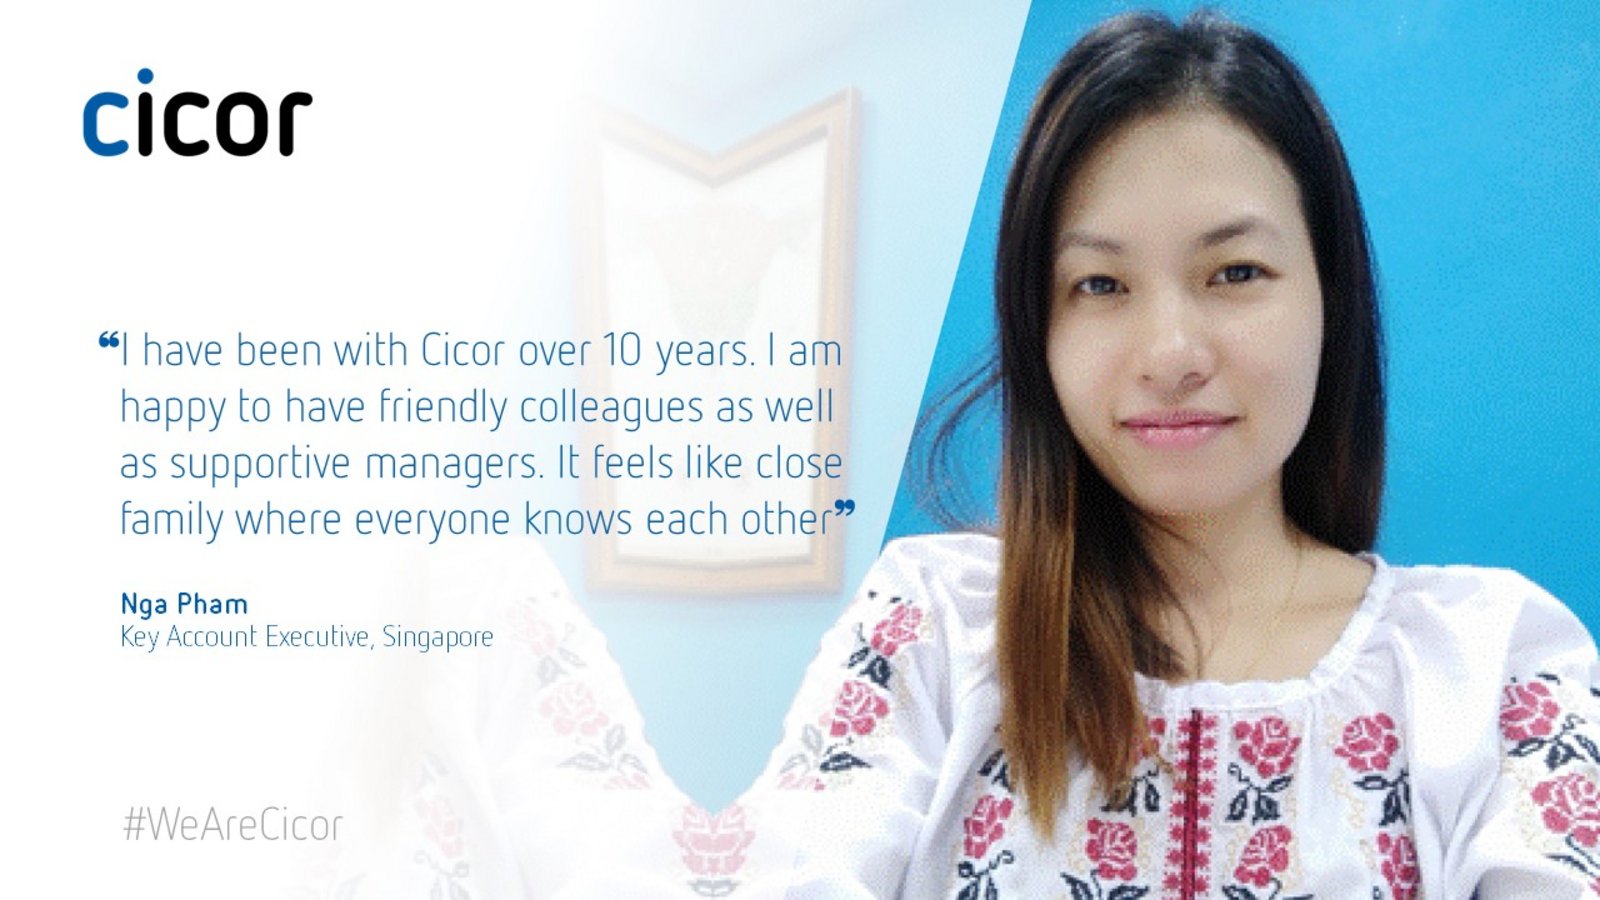 Testimonial of Nga Pham who works at the Cicor site in Singapore